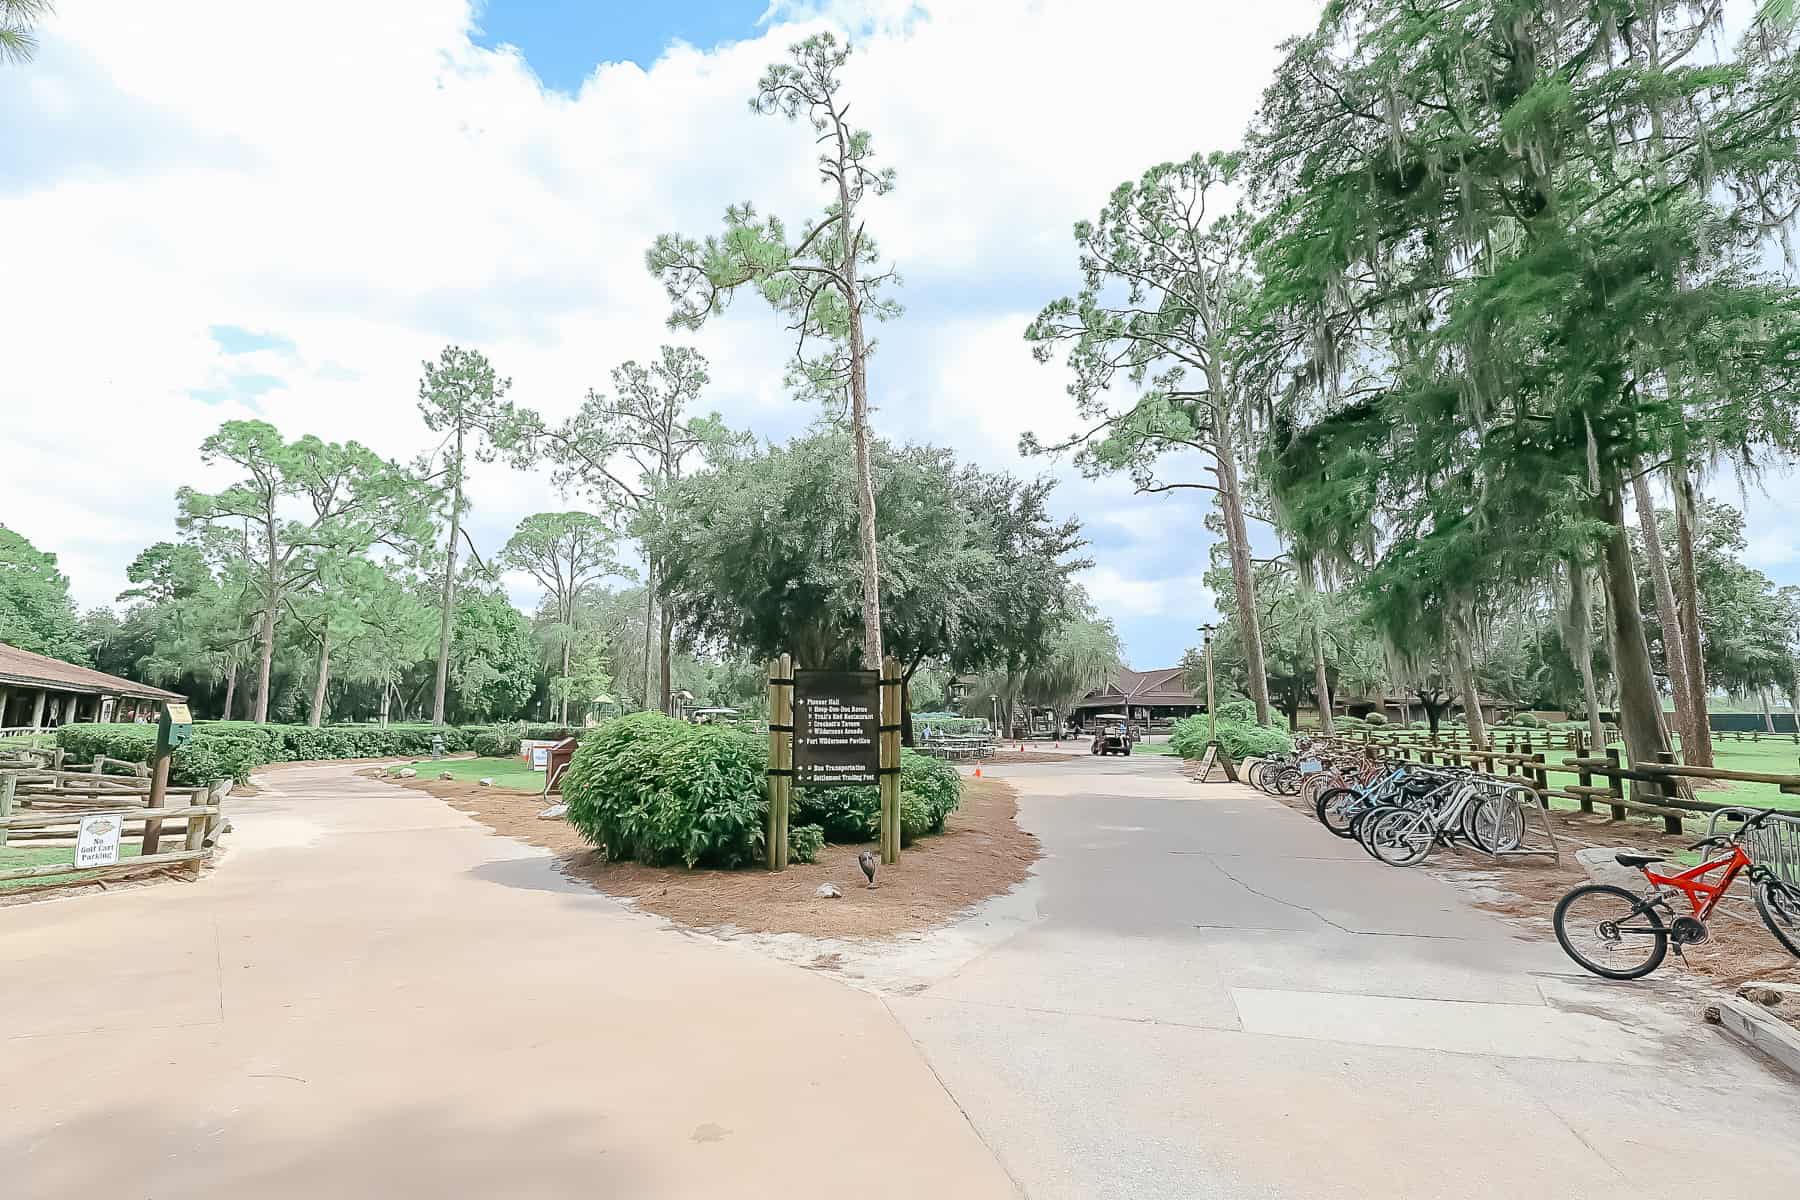 bicycle parking area at Fort Wilderness